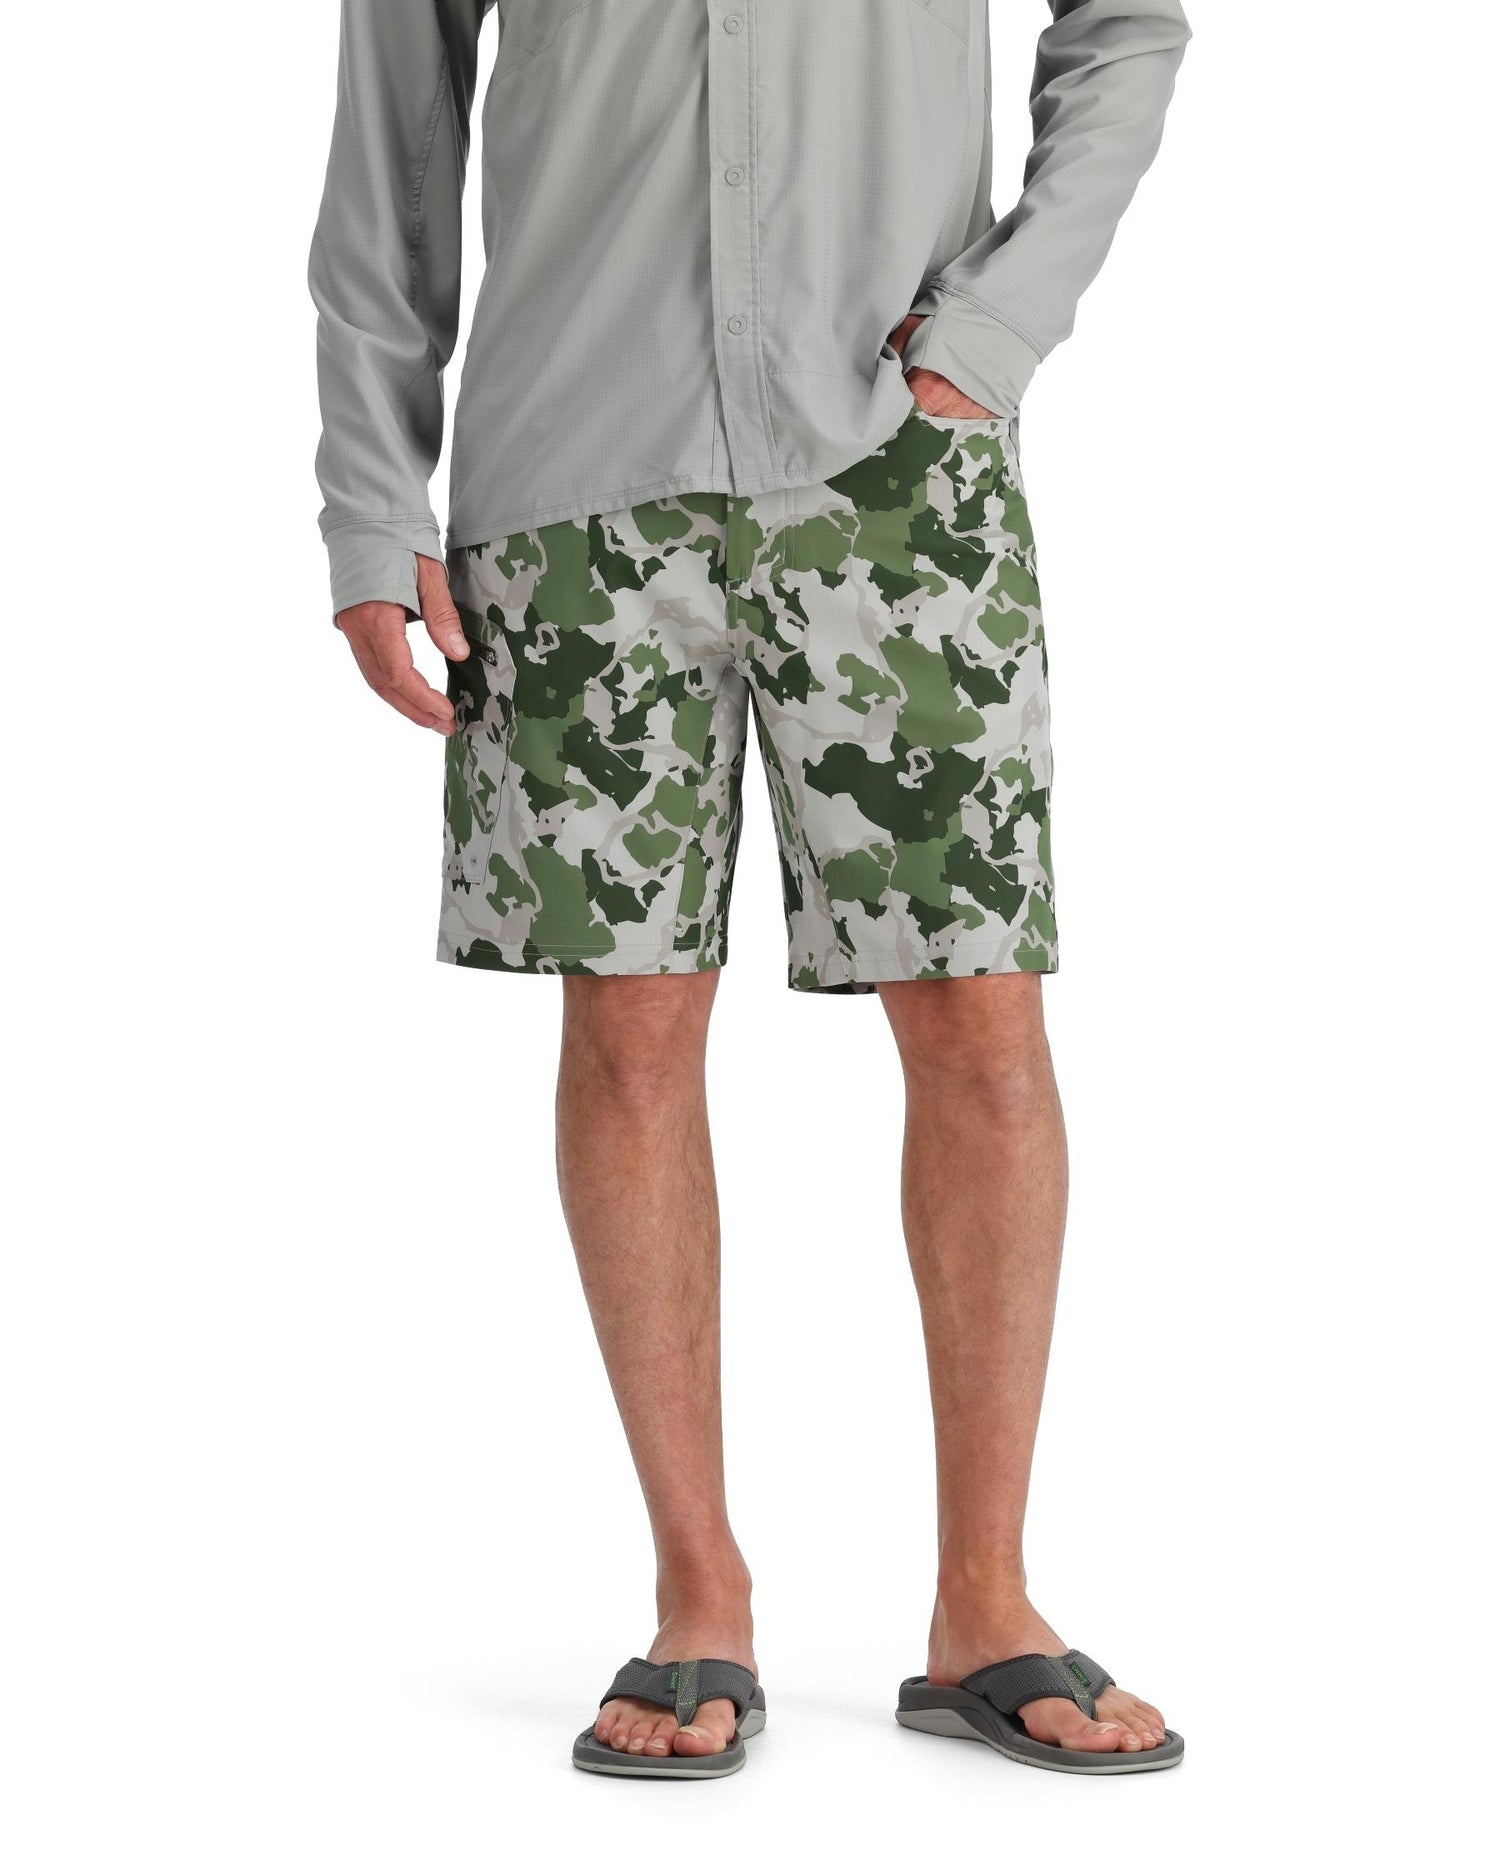 13495-1089-Seamount-Board-Shorts-Model-S24-Front -rollover